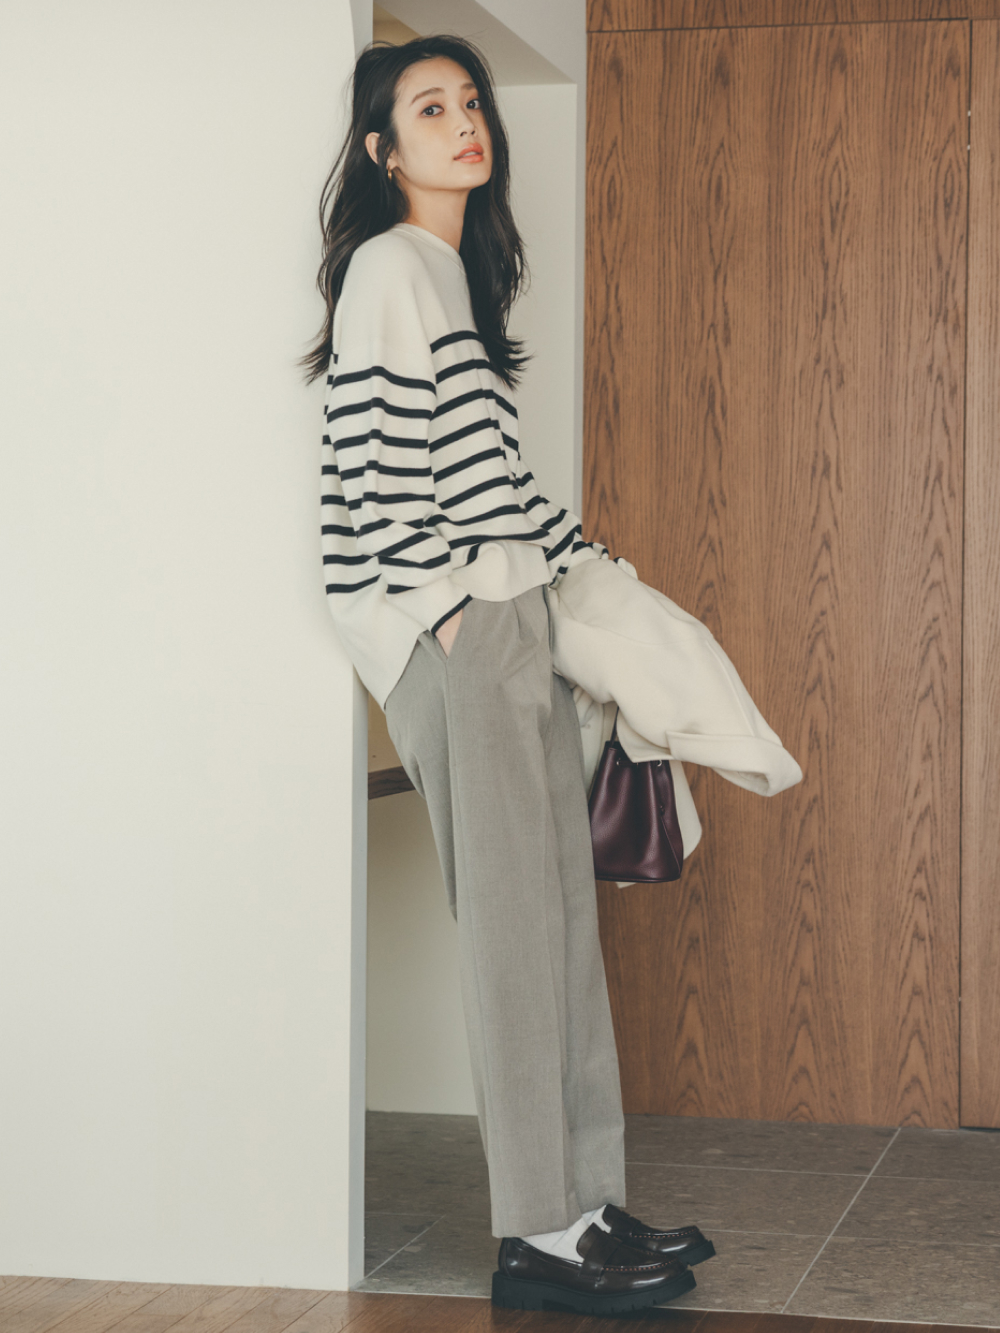 Shop looks for「Ultra Stretch Leggings Pants、Smooth Cotton